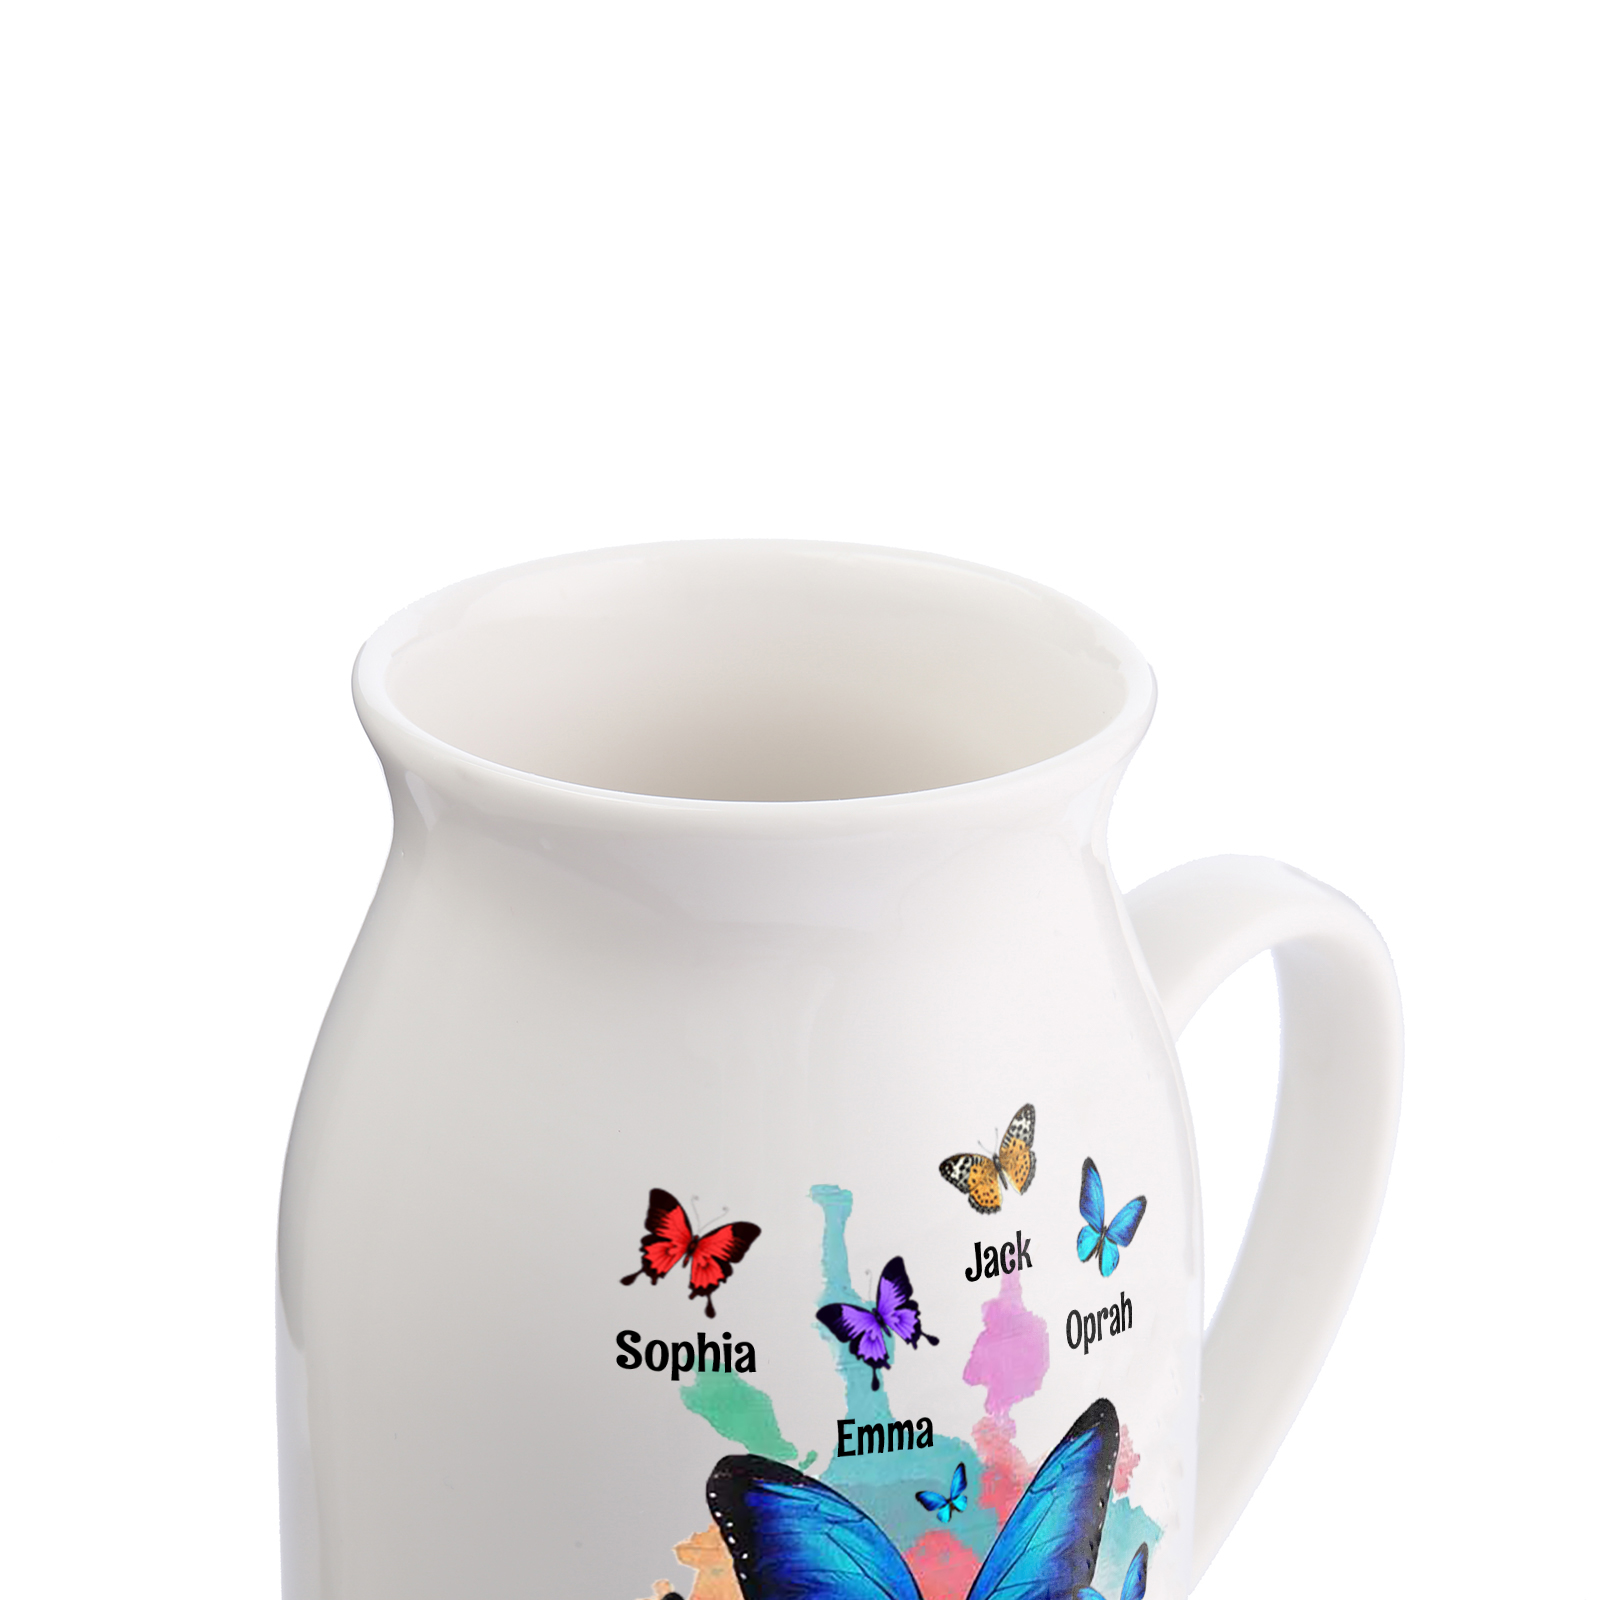 6 Names - Personalized Beautiful Colorful Butterfly Style Ceramic Vase with Customizable Names As a Wonderful Gift For Grandma